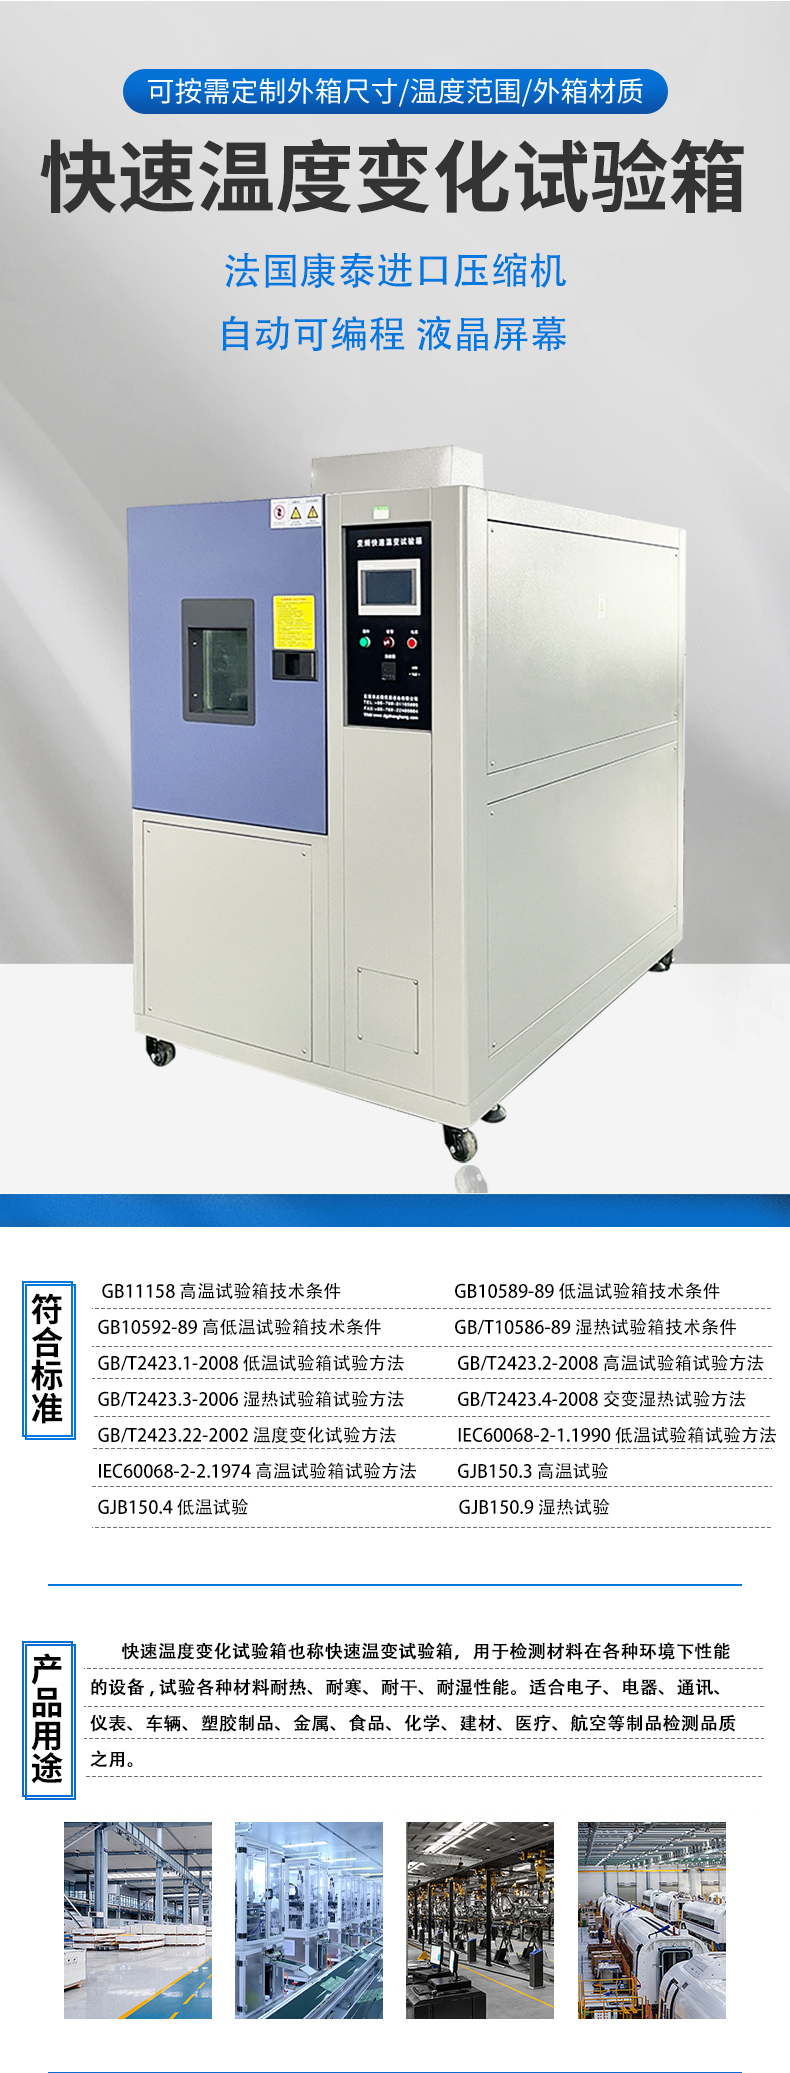 Programmable rapid temperature change test chamber High and low temperature accelerated aging test machine Temperature impact change aging chamber